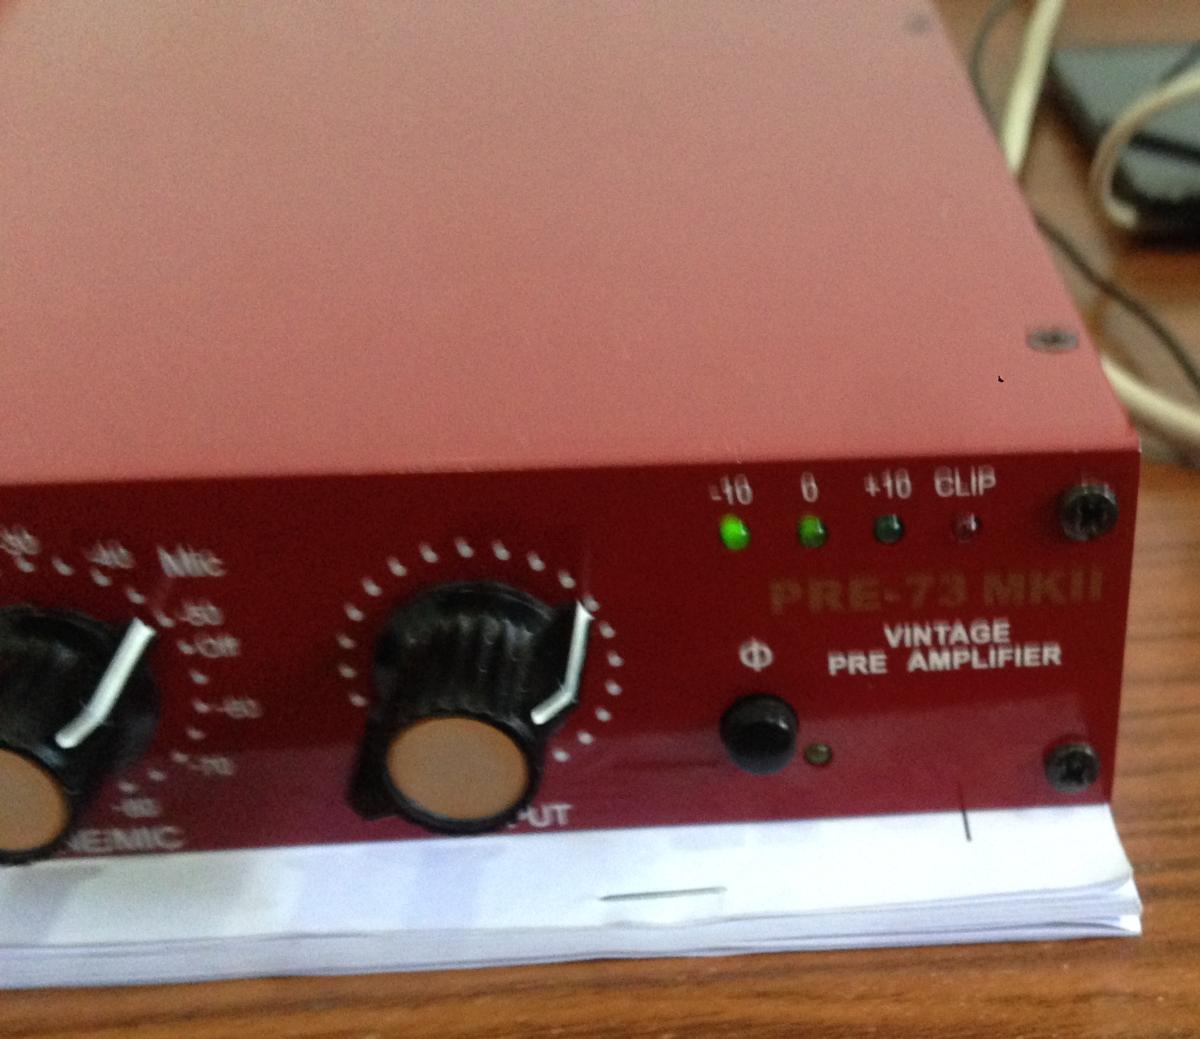 Pre-amps can help you correcting your gain stage before recording